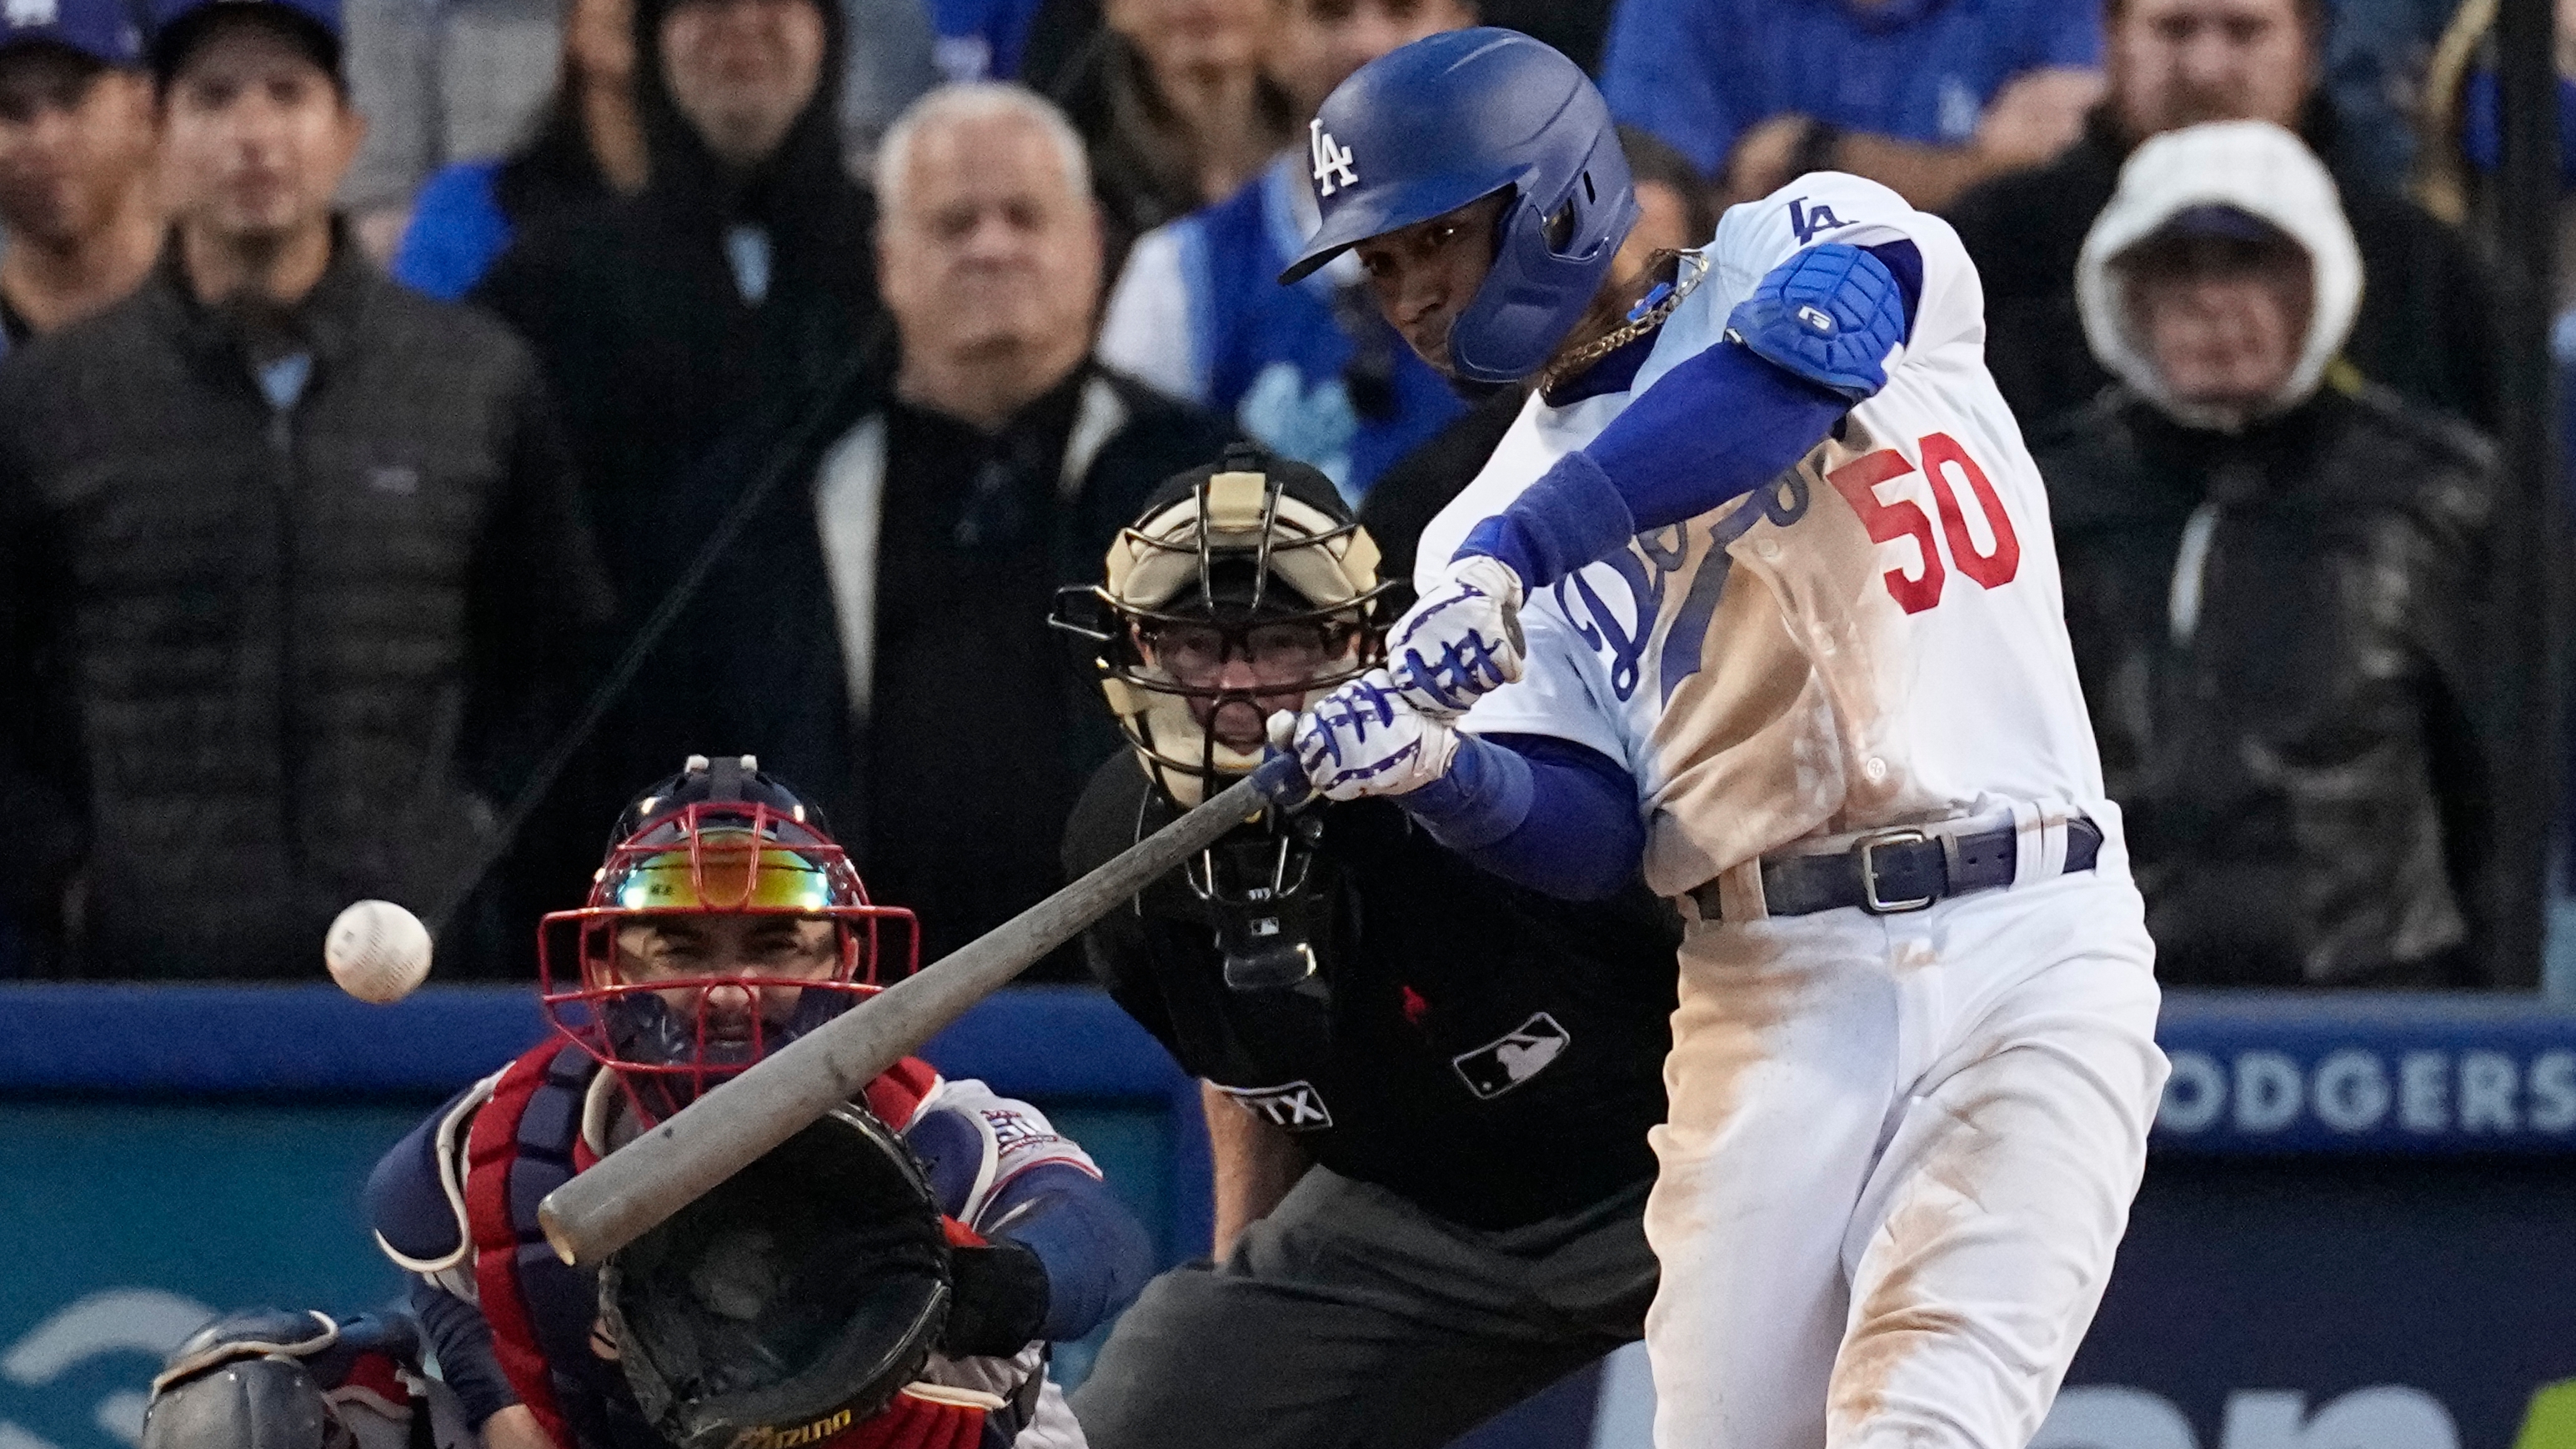 Dodgers' continuing slump drops them to third place in NL West